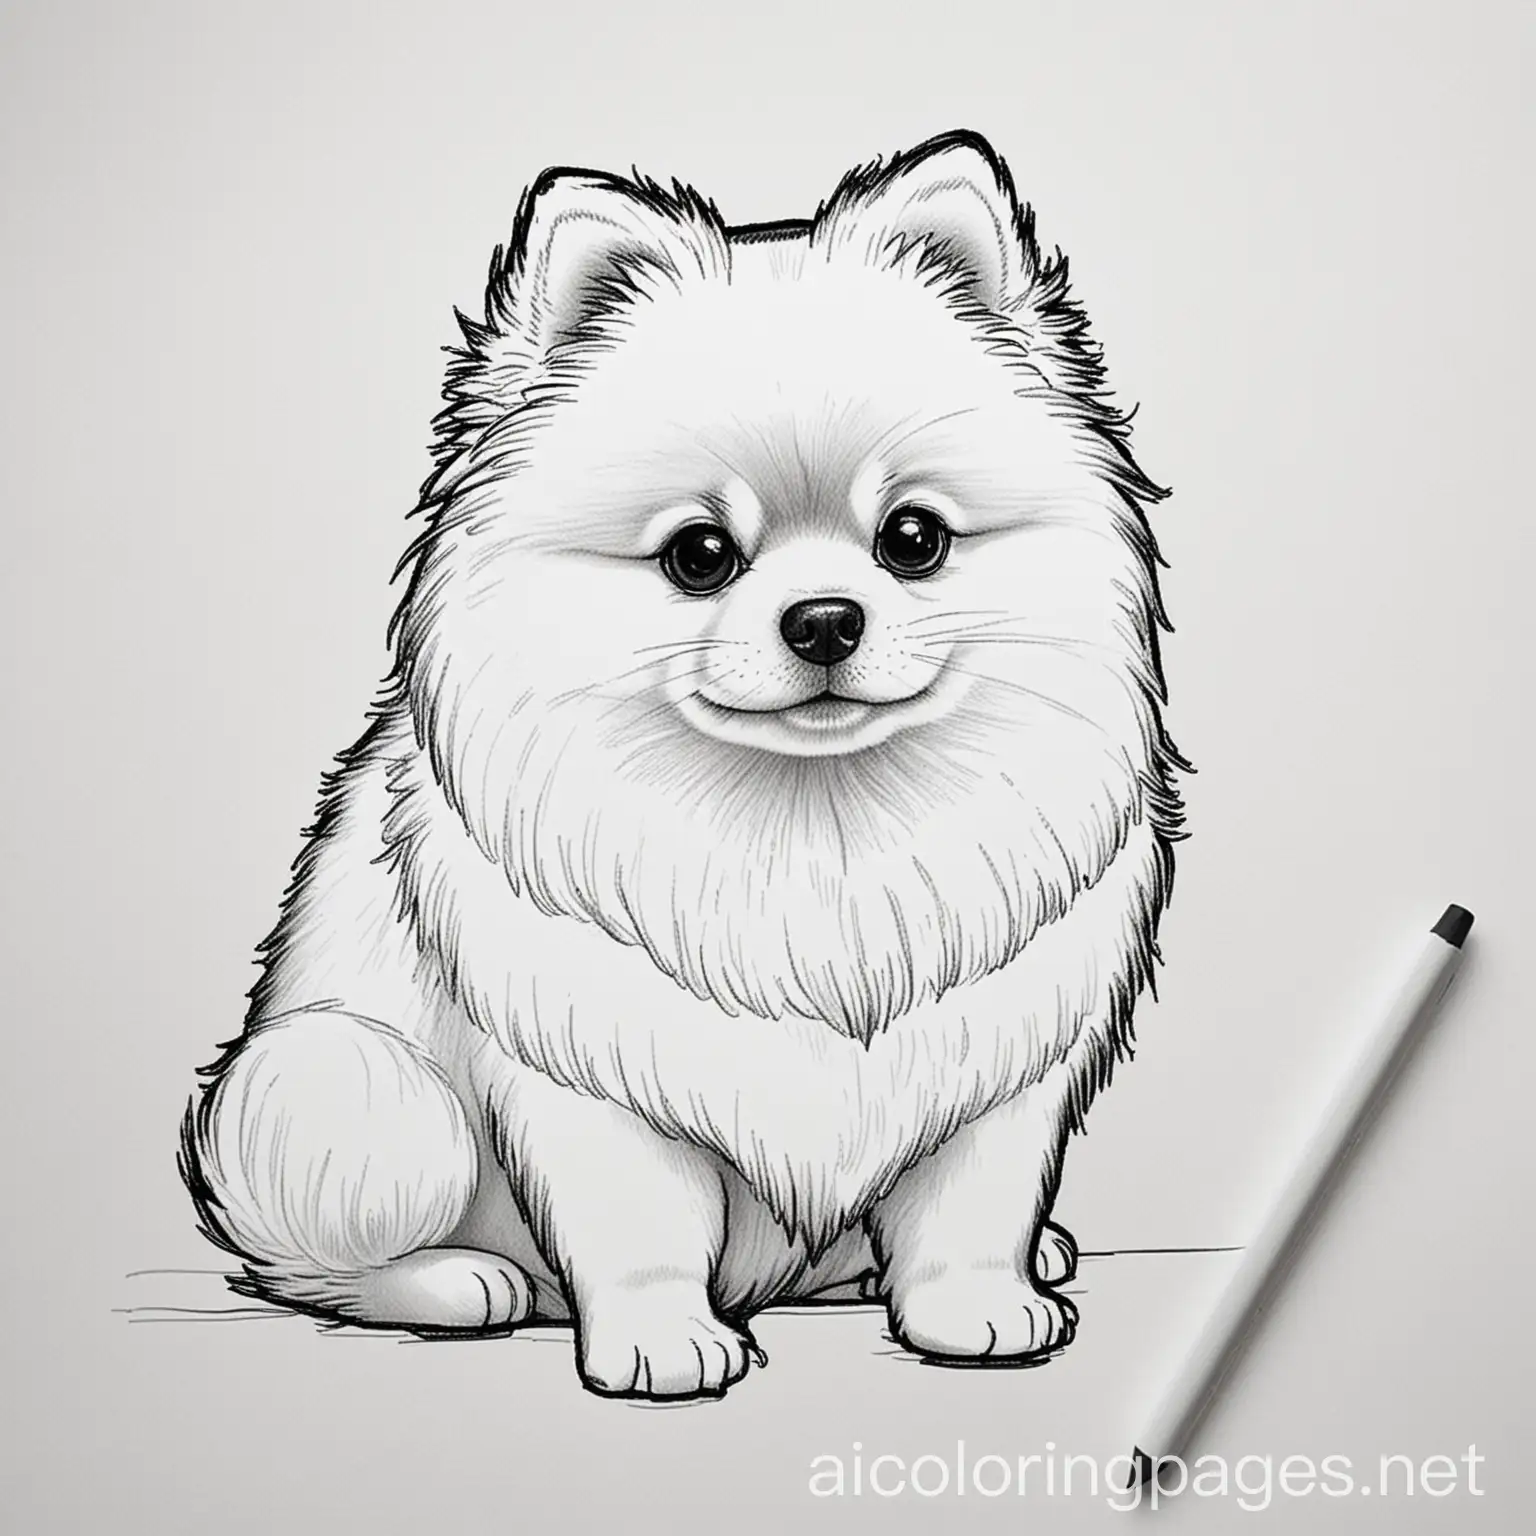 Miniature-Pomeranian-Dog-Coloring-Page-with-Squiggles-and-Patterns